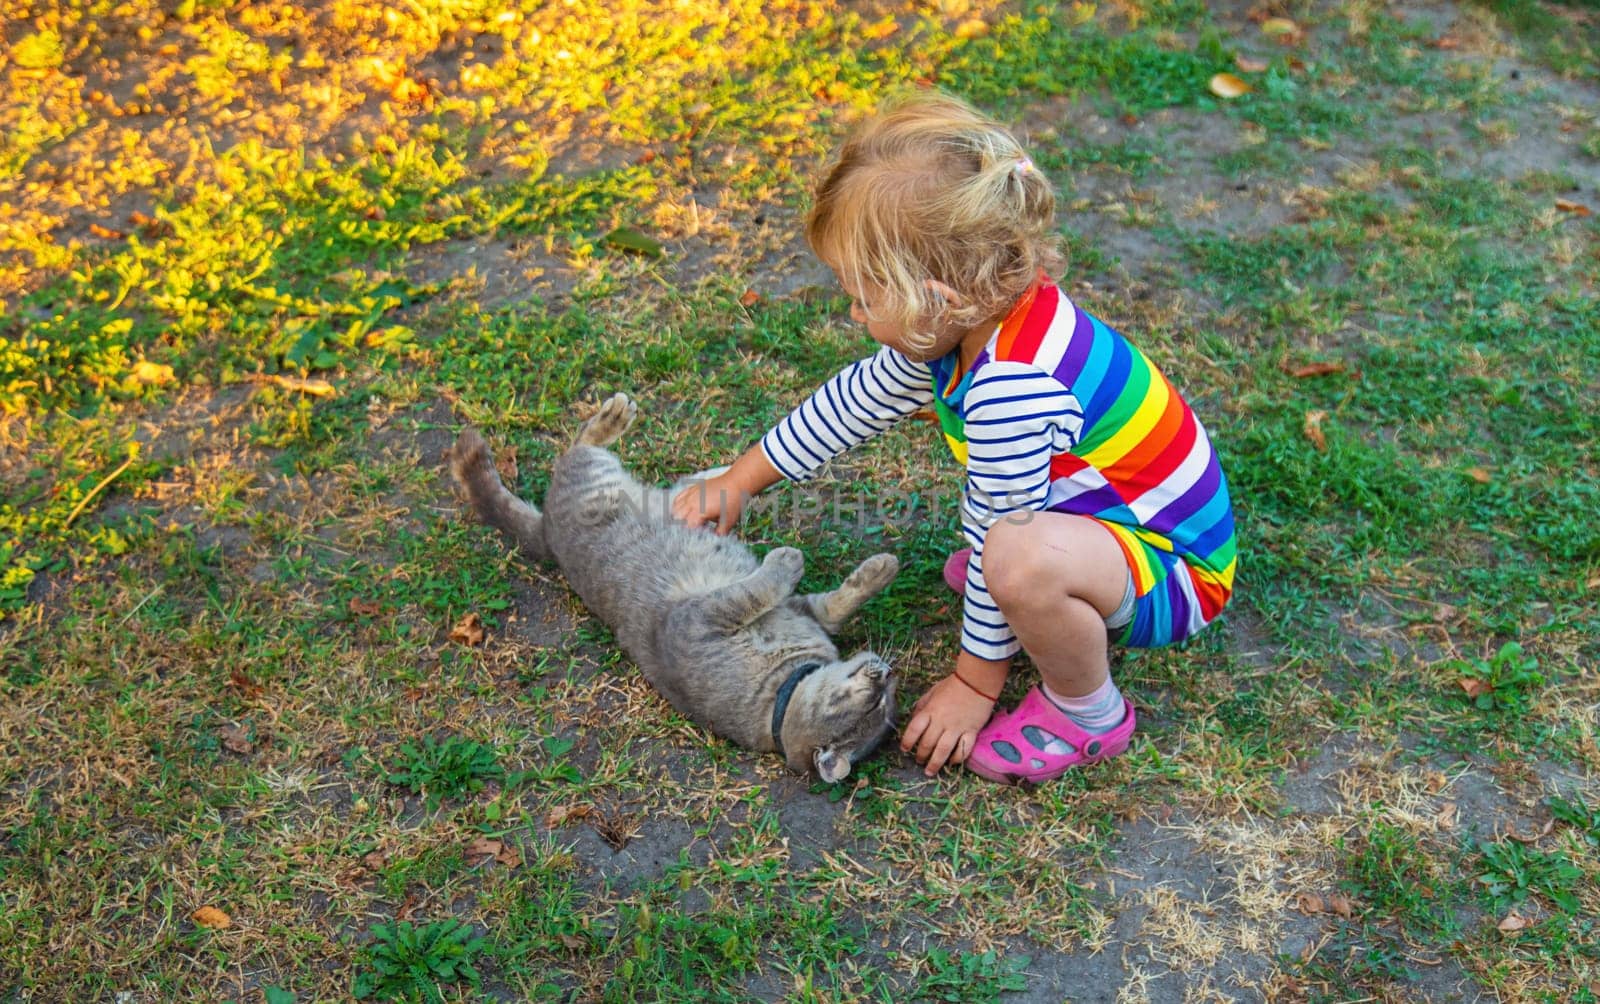 child plays with a cat in nature. Selective focus. kid.